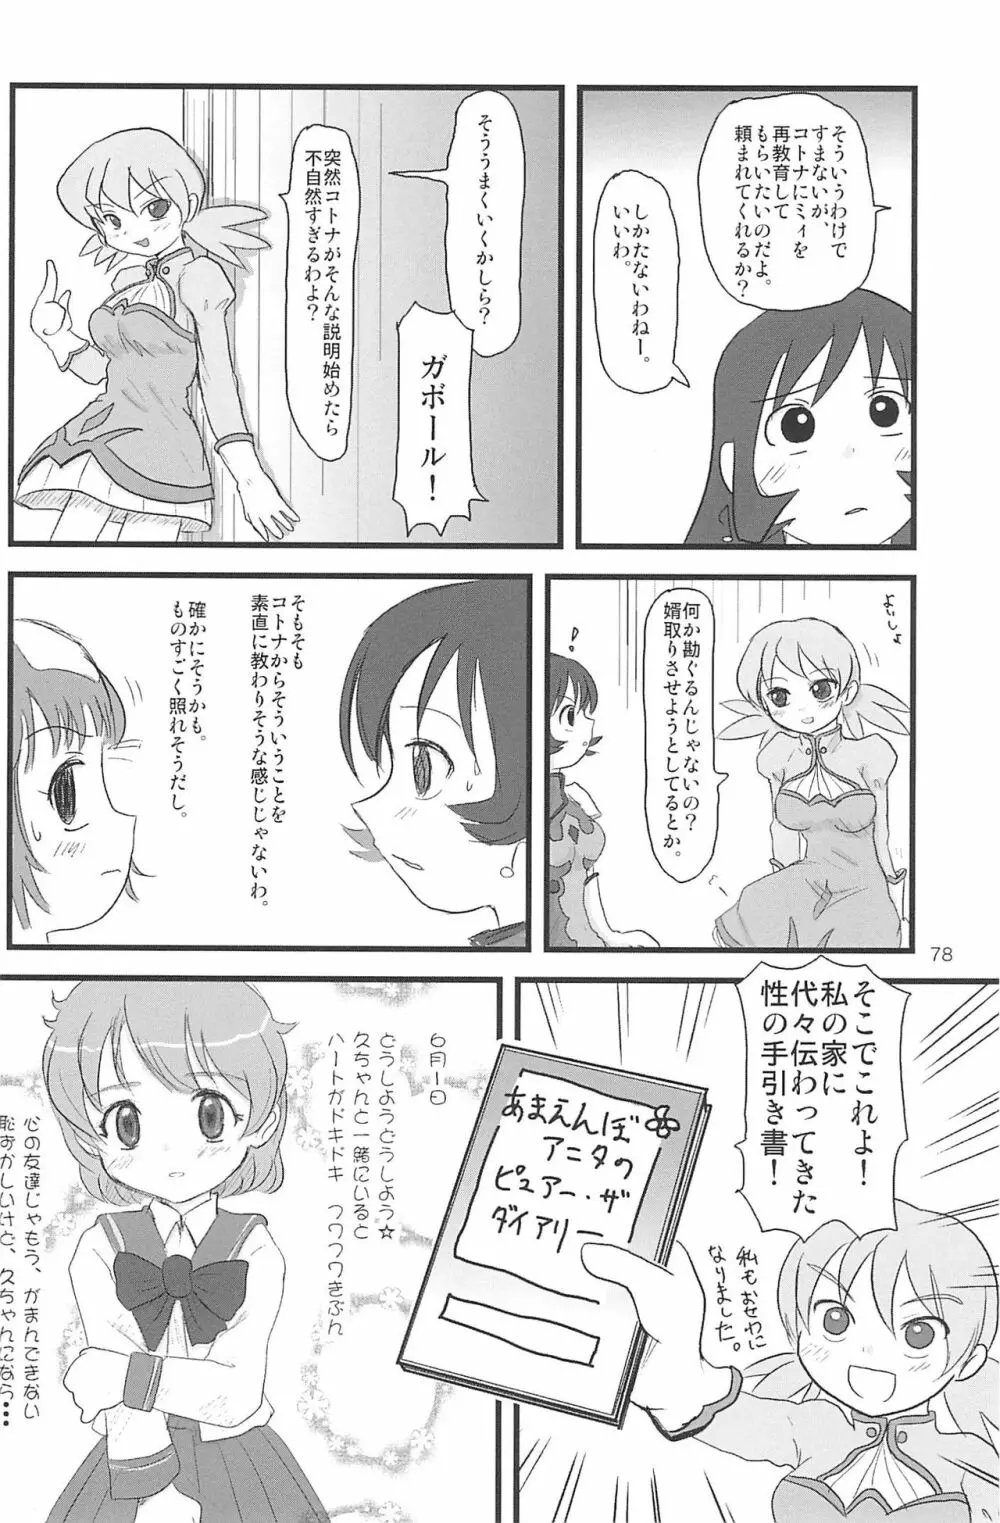 ND-special Volume 5 78ページ